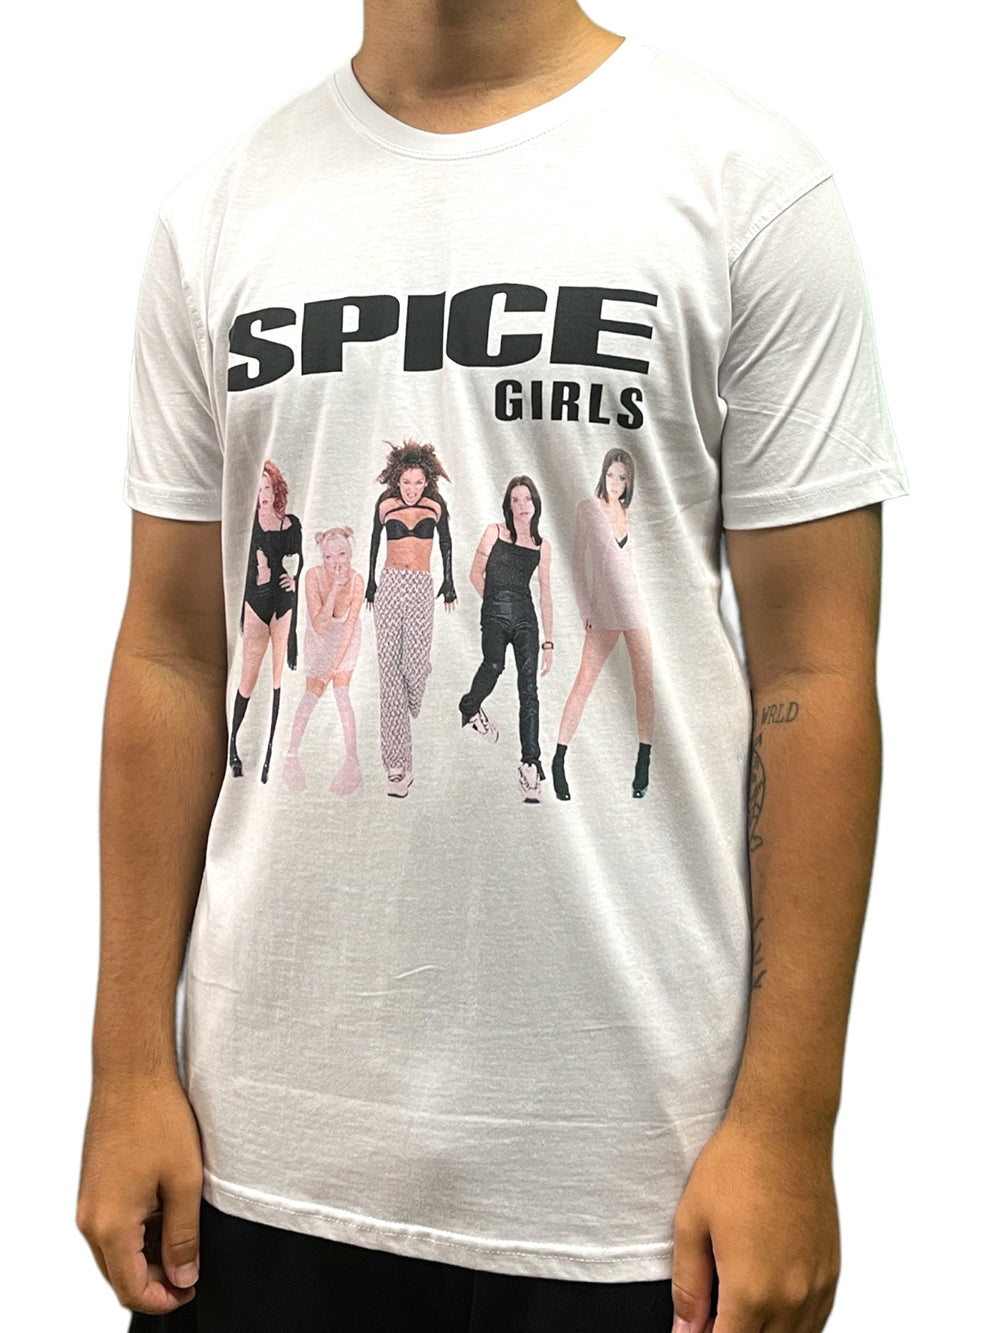 Spice Girls Photo Poses Unisex Official T Shirt Brand New Various Sizes